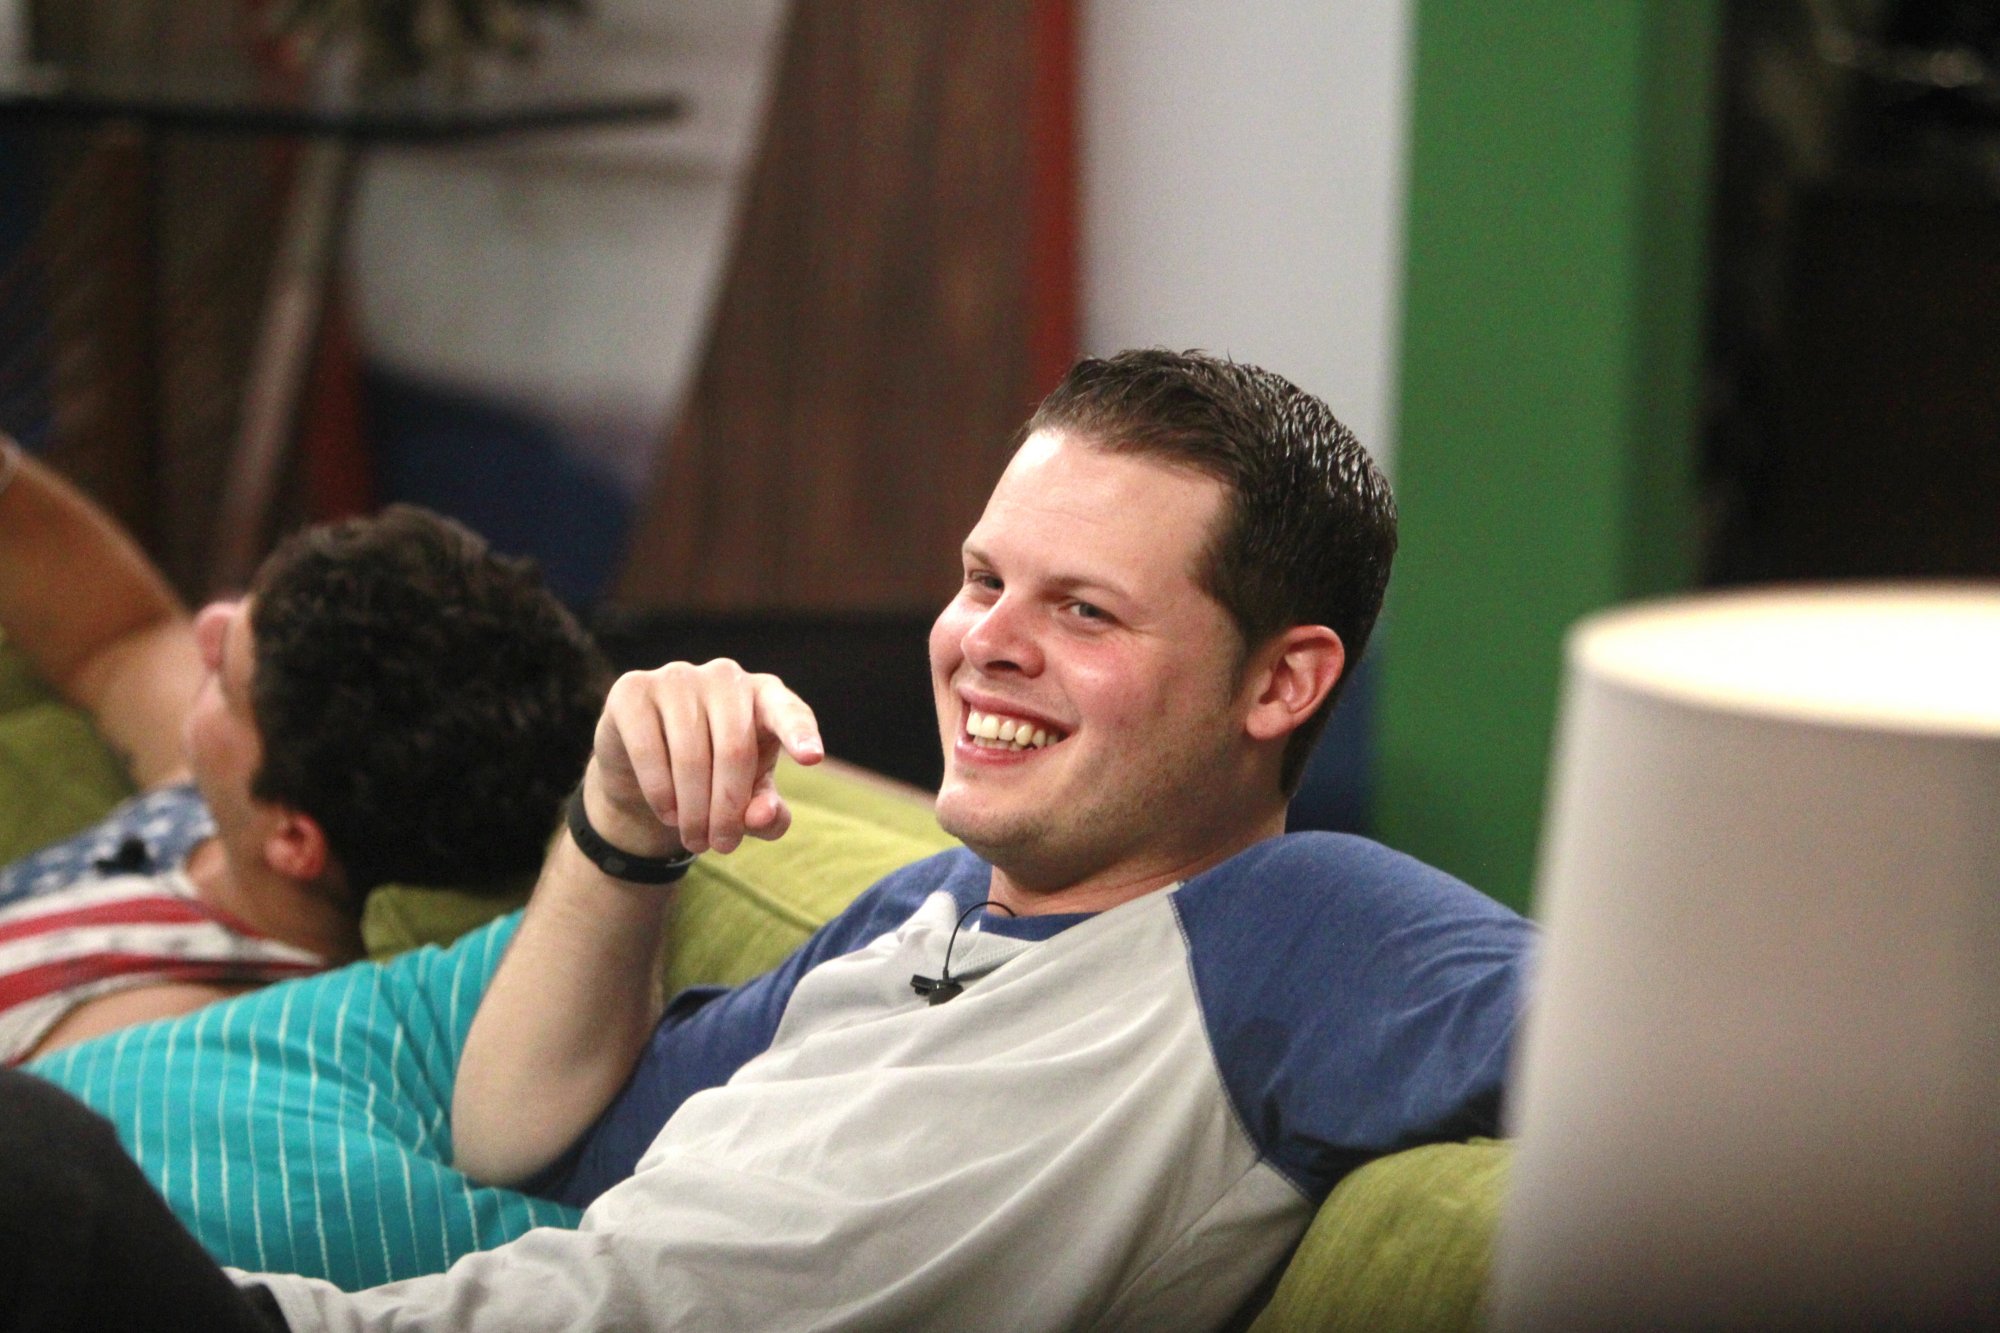 Derrick Levasseur, who is one of the 'Big Brother' winners, wears a blue and white baseball shirt.